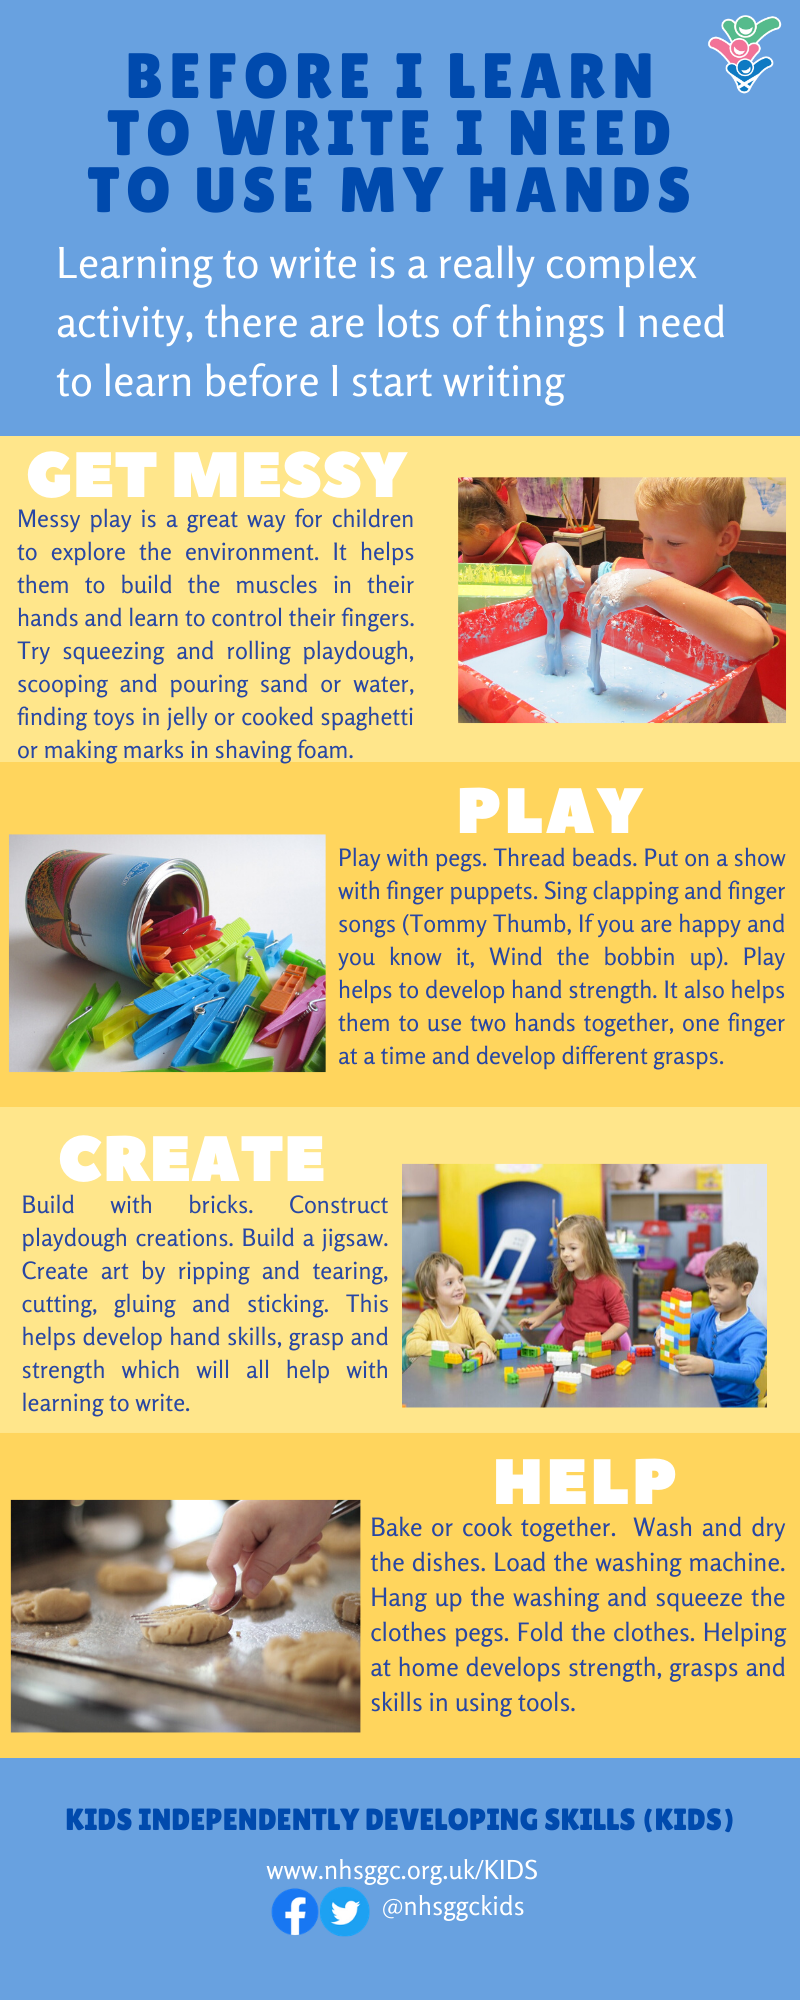 4 Important Skills Your Child is Learning with Containers